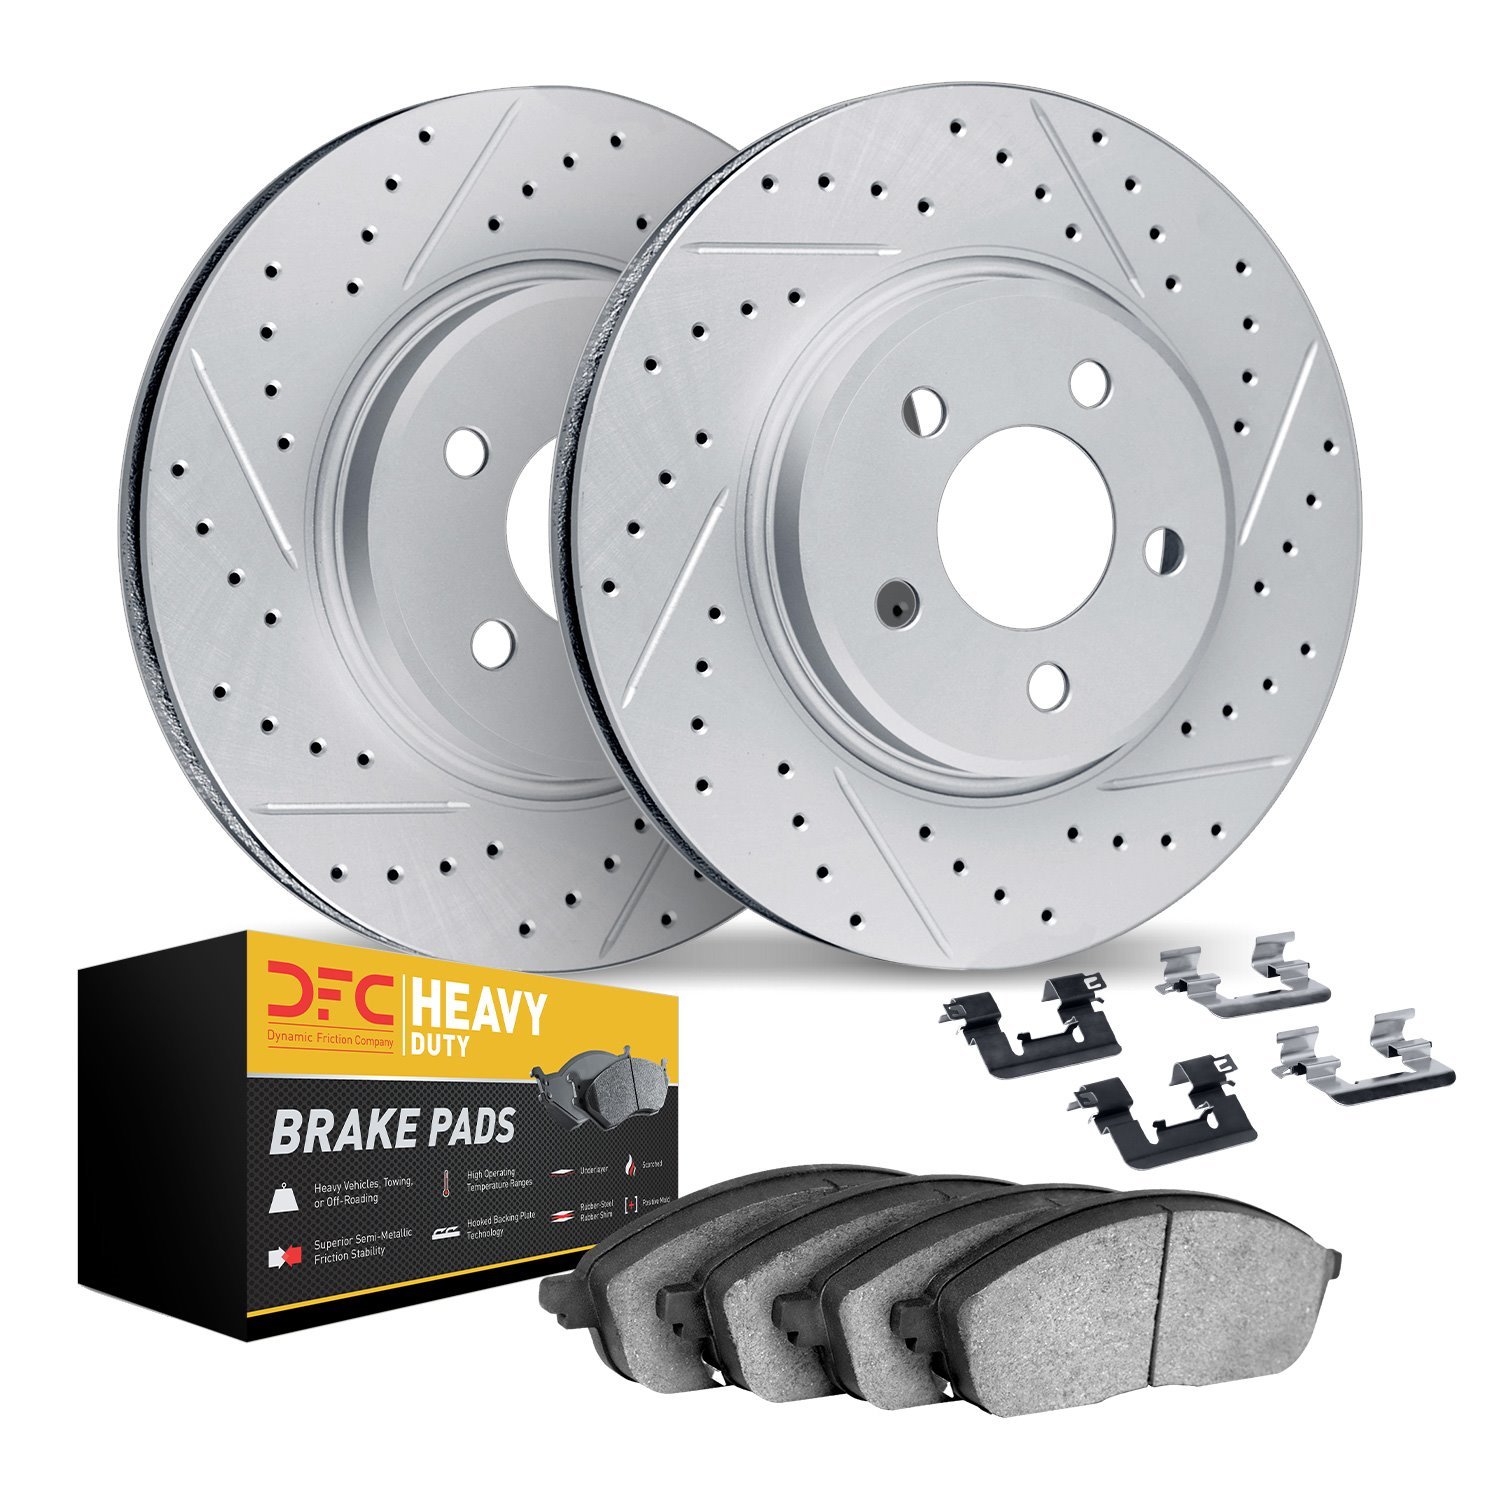 2212-54003 Geoperformance Drilled/Slotted Rotors w/Heavy-Duty Pads Kit & Hardware, 2010-2011 Ford/Lincoln/Mercury/Mazda, Positio